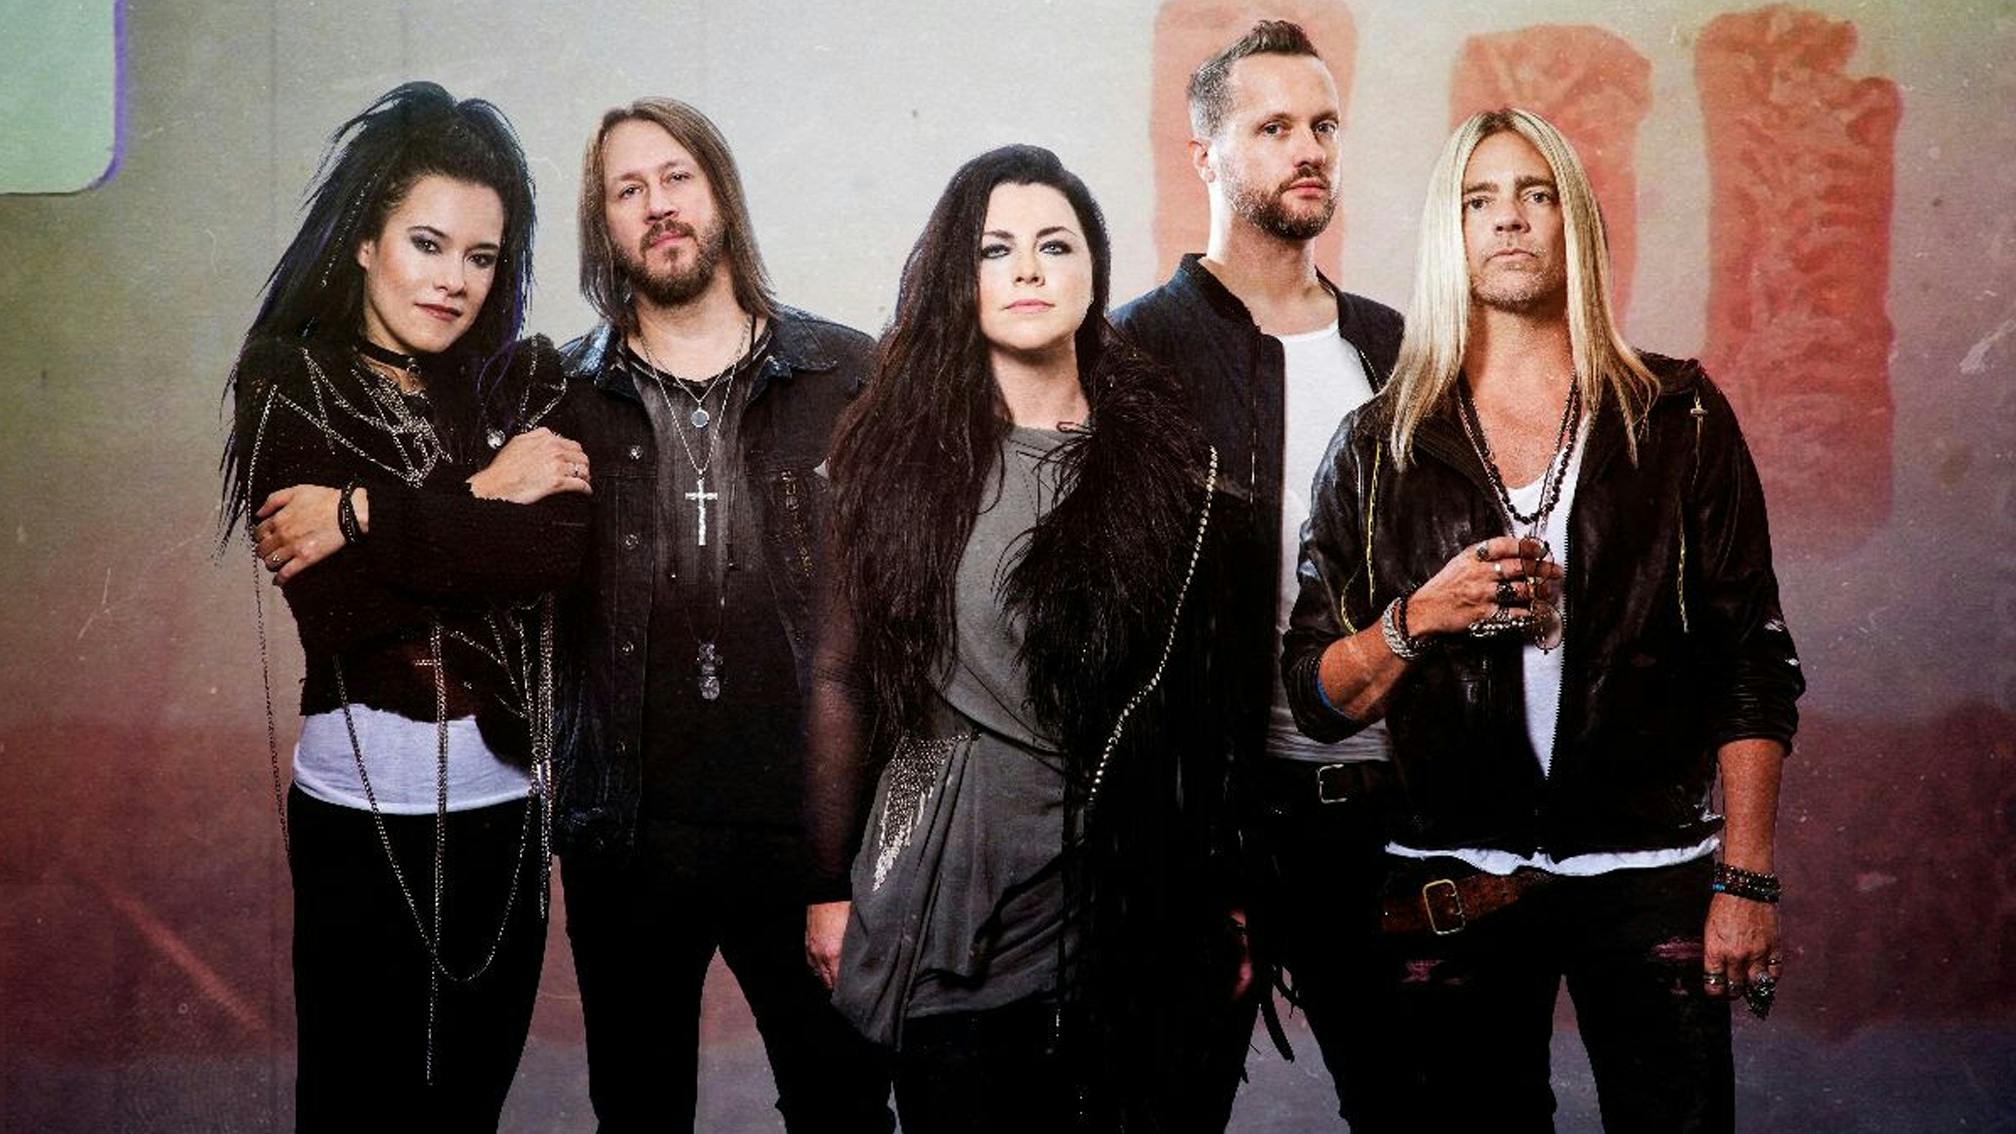 Evanescence Tease New Single Featuring Lzzy Hale, Taylor Momsen And More